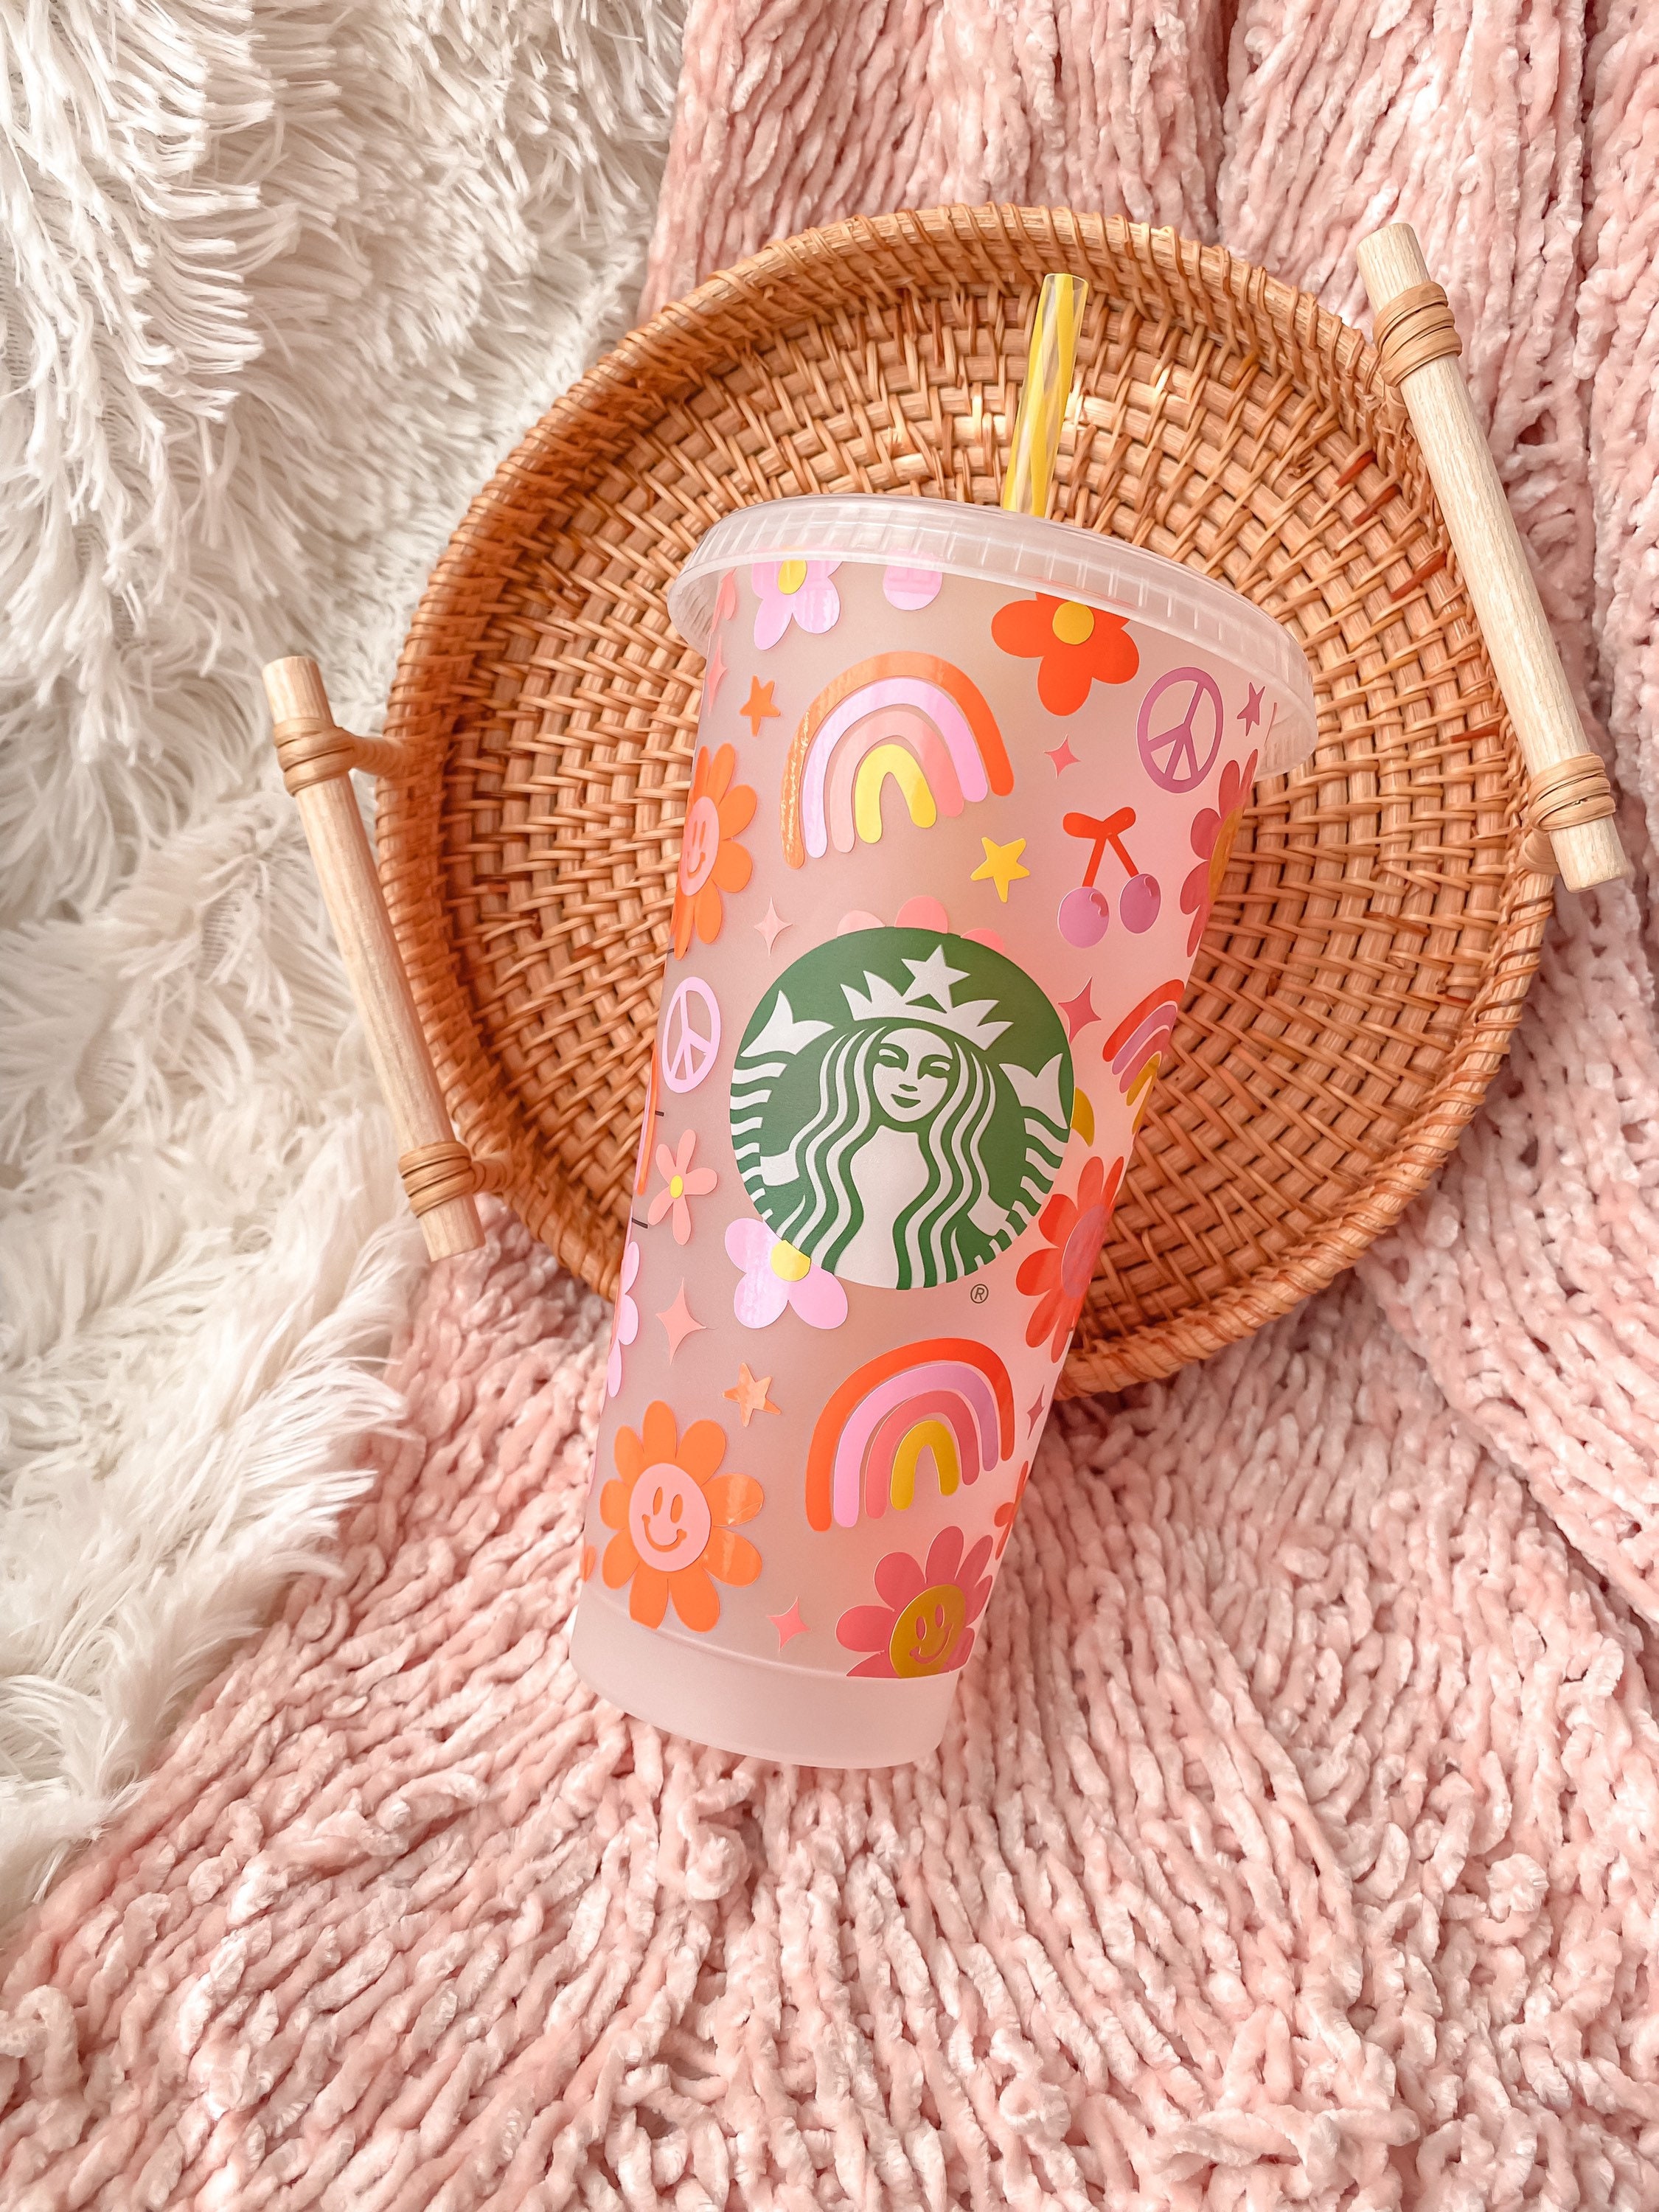 STARBUCKS FLORAL PINK GLASS BOTTLE CUP 20 OZ FLOWERS